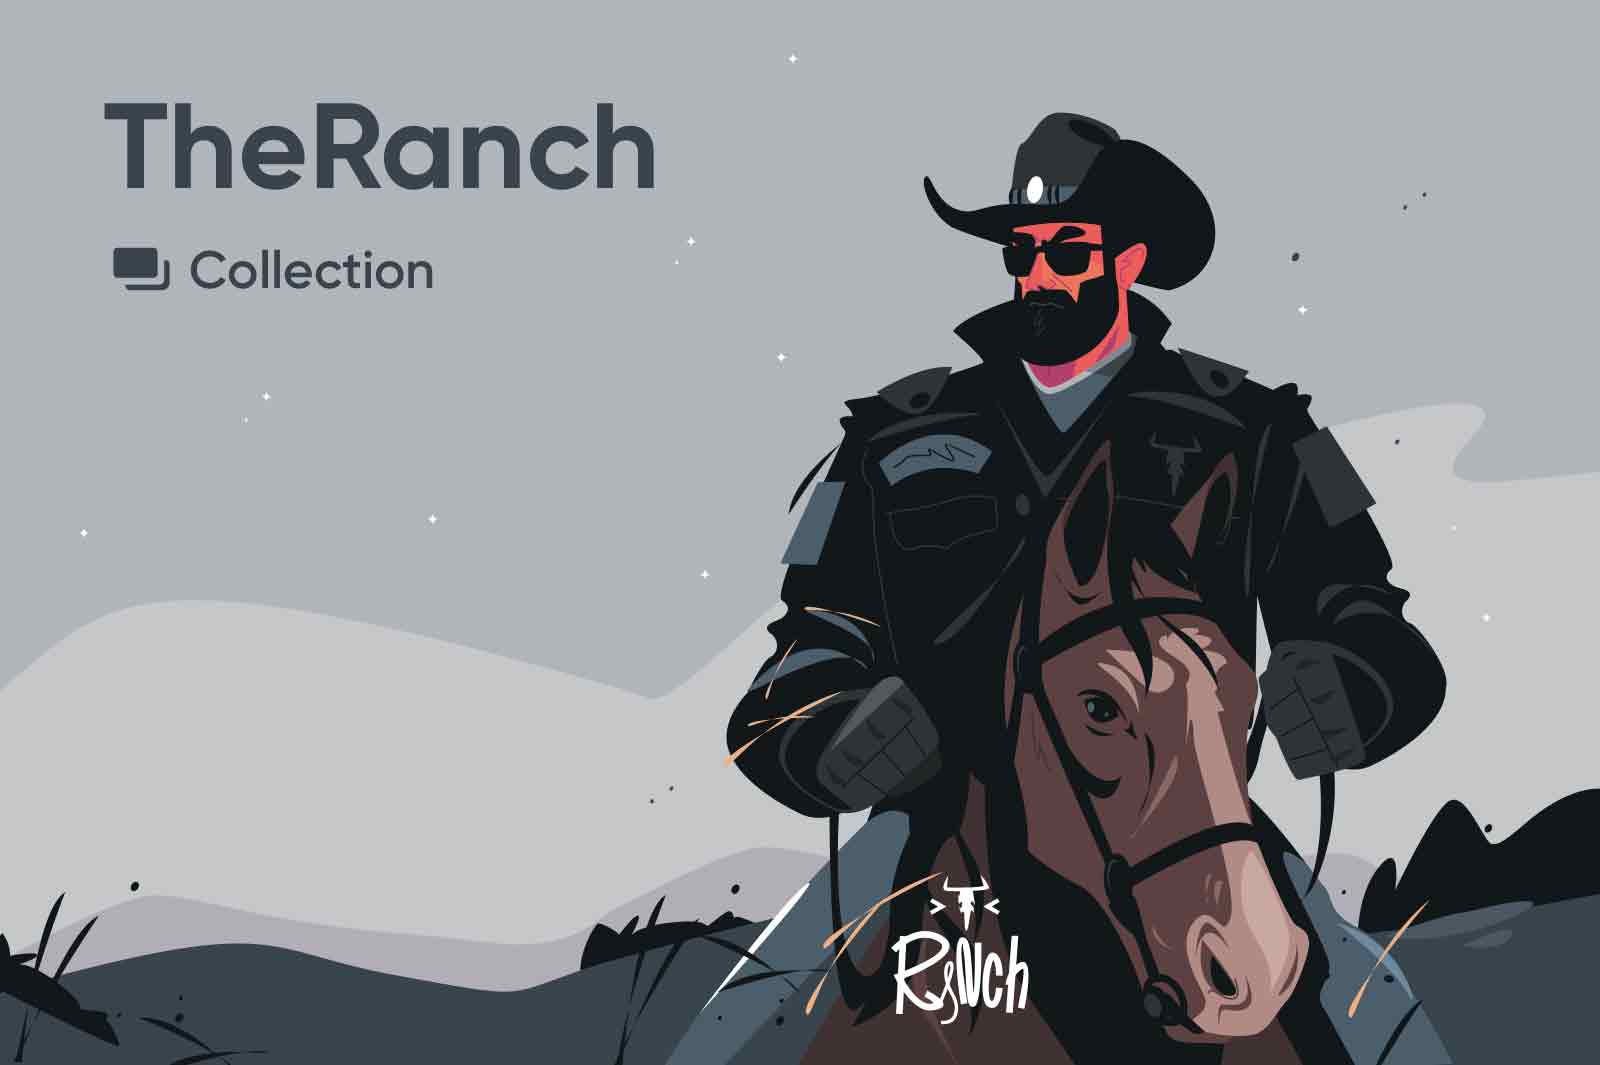 Series of illustrations about Ranch lifestyle with charismatic strong characters